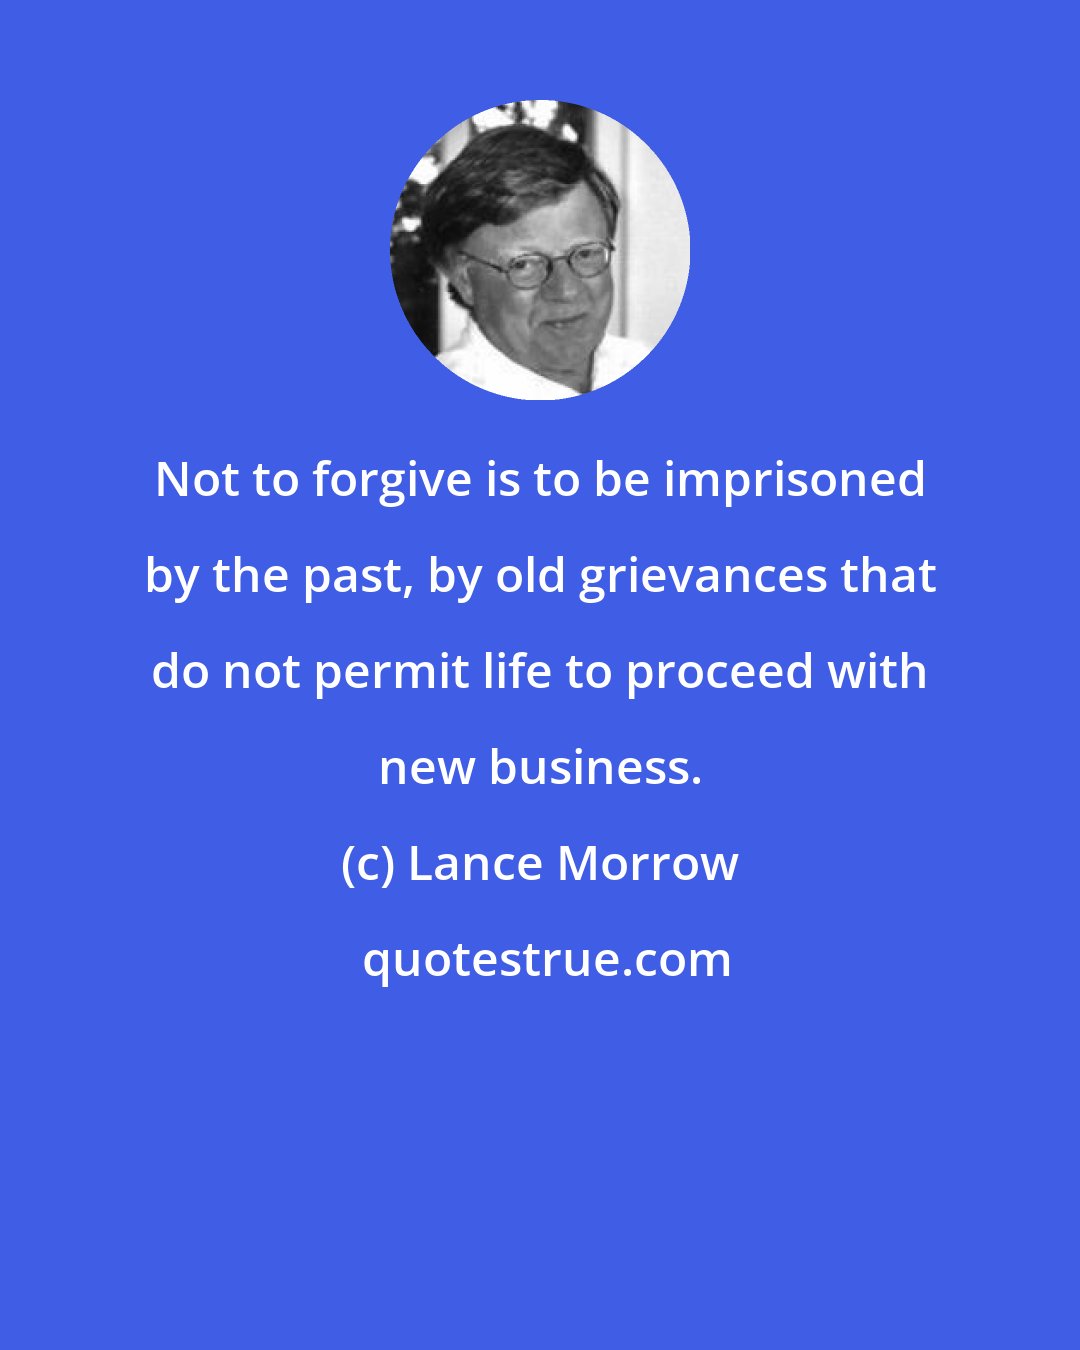 Lance Morrow: Not to forgive is to be imprisoned by the past, by old grievances that do not permit life to proceed with new business.